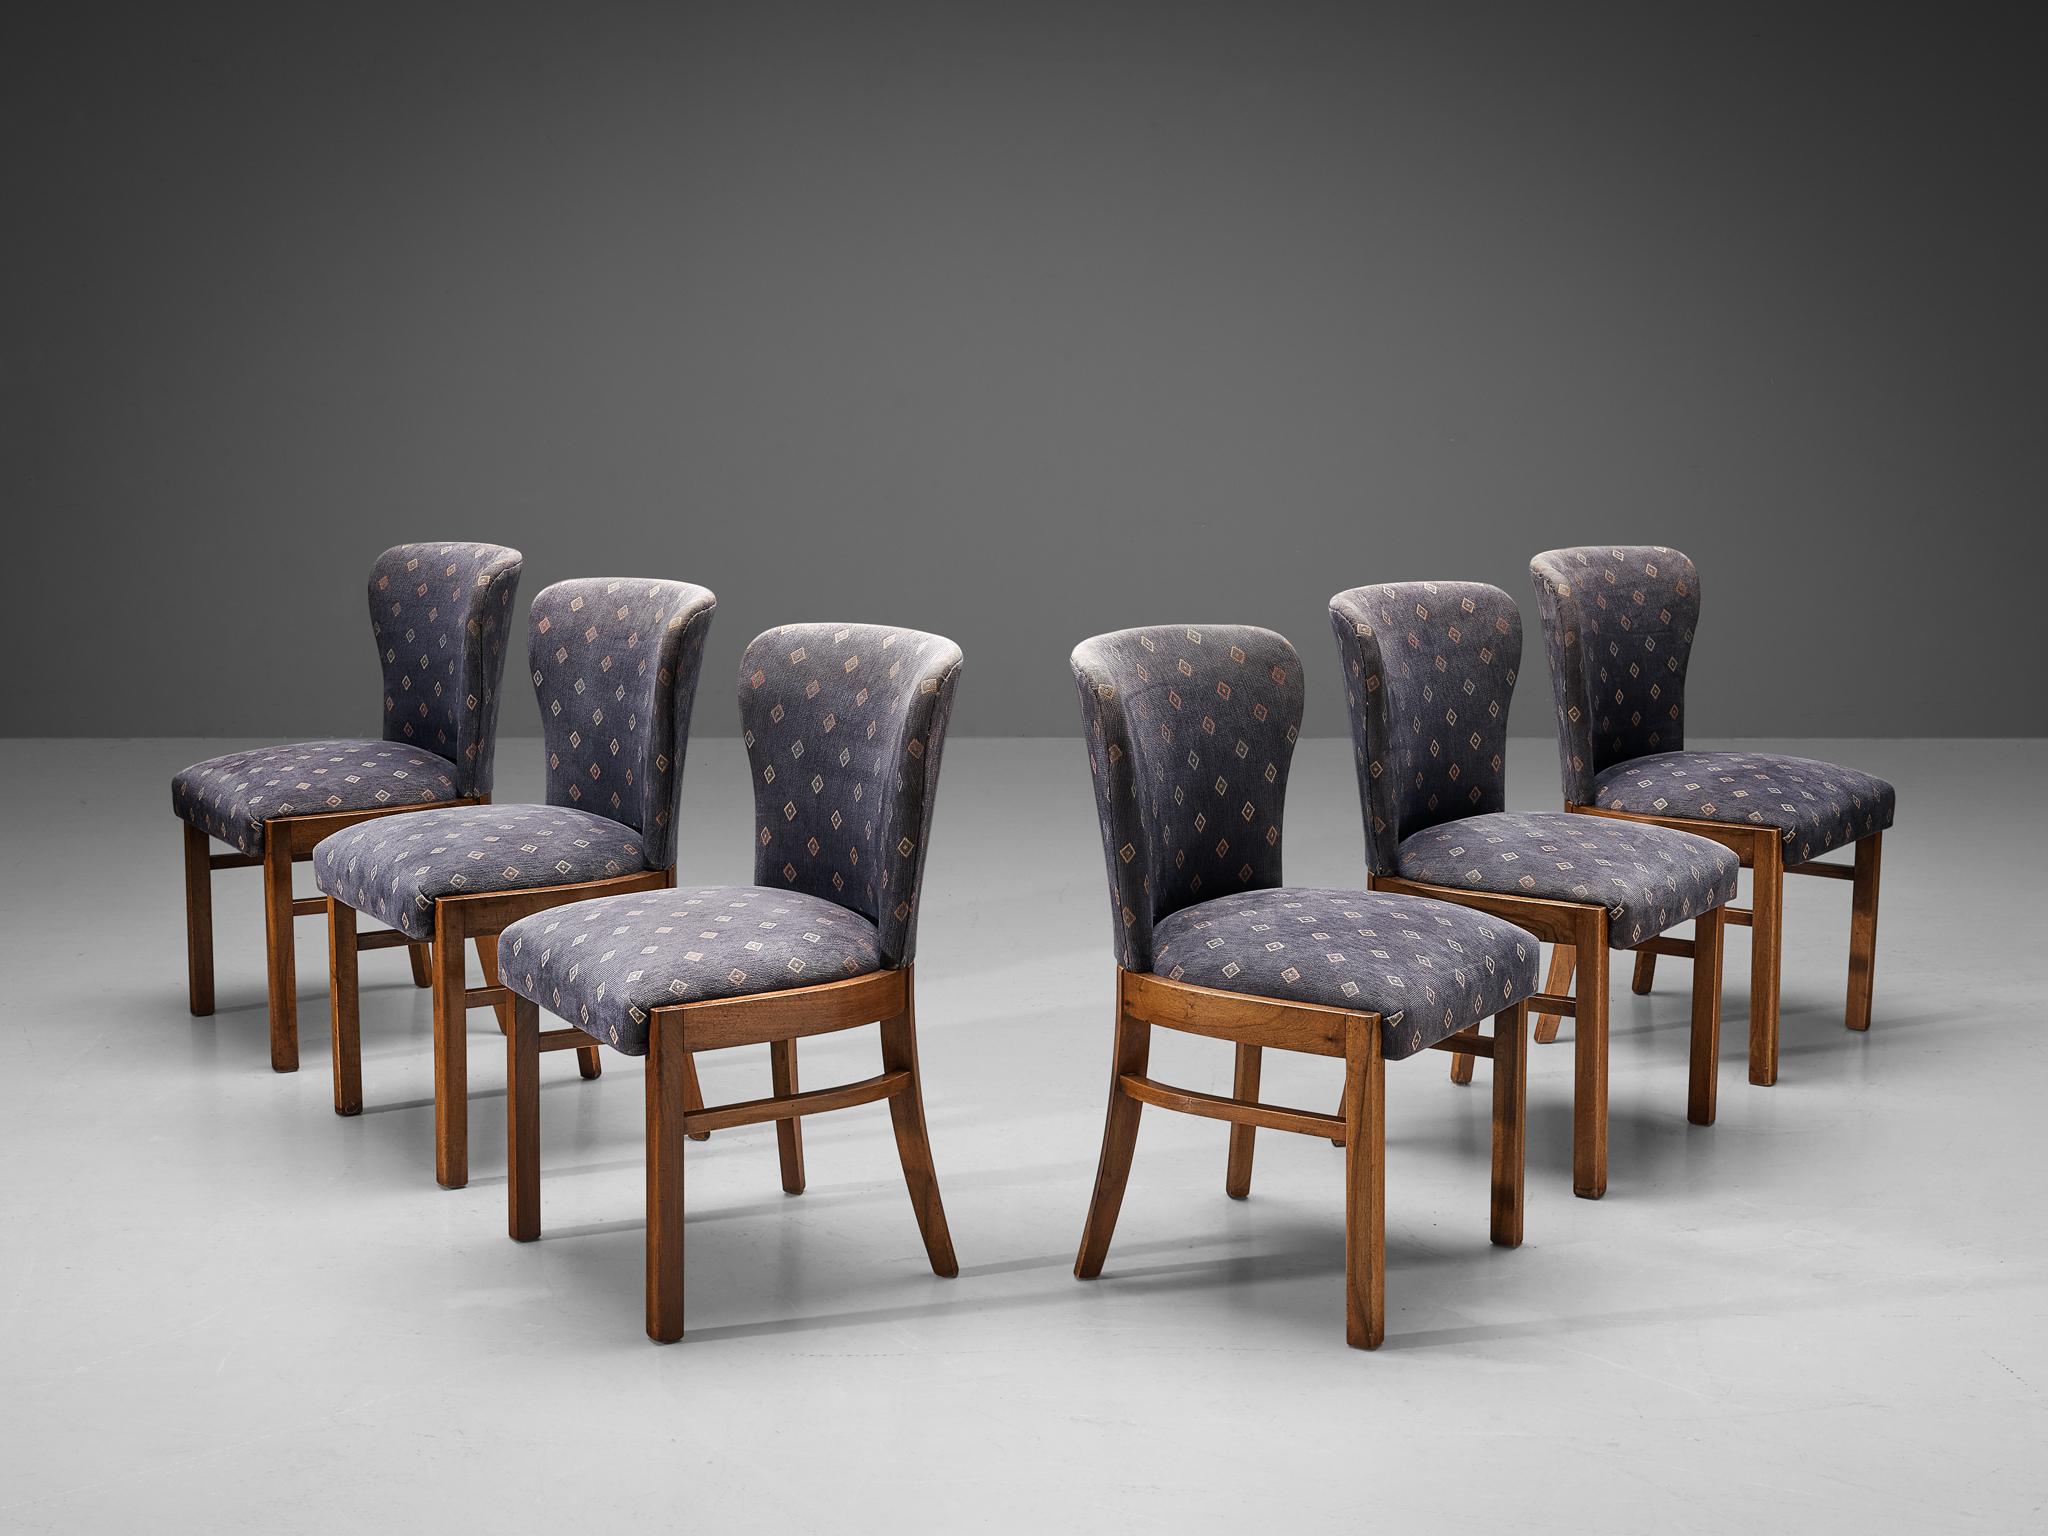 Set of six dining chairs, walnut, fabric, Europe, 1940s.

The unique lines and curves of the design are striking and the tapered wooden legs complement its shape beautifully. Highly comfortable and qualitative dining chairs. The fabric has a grey